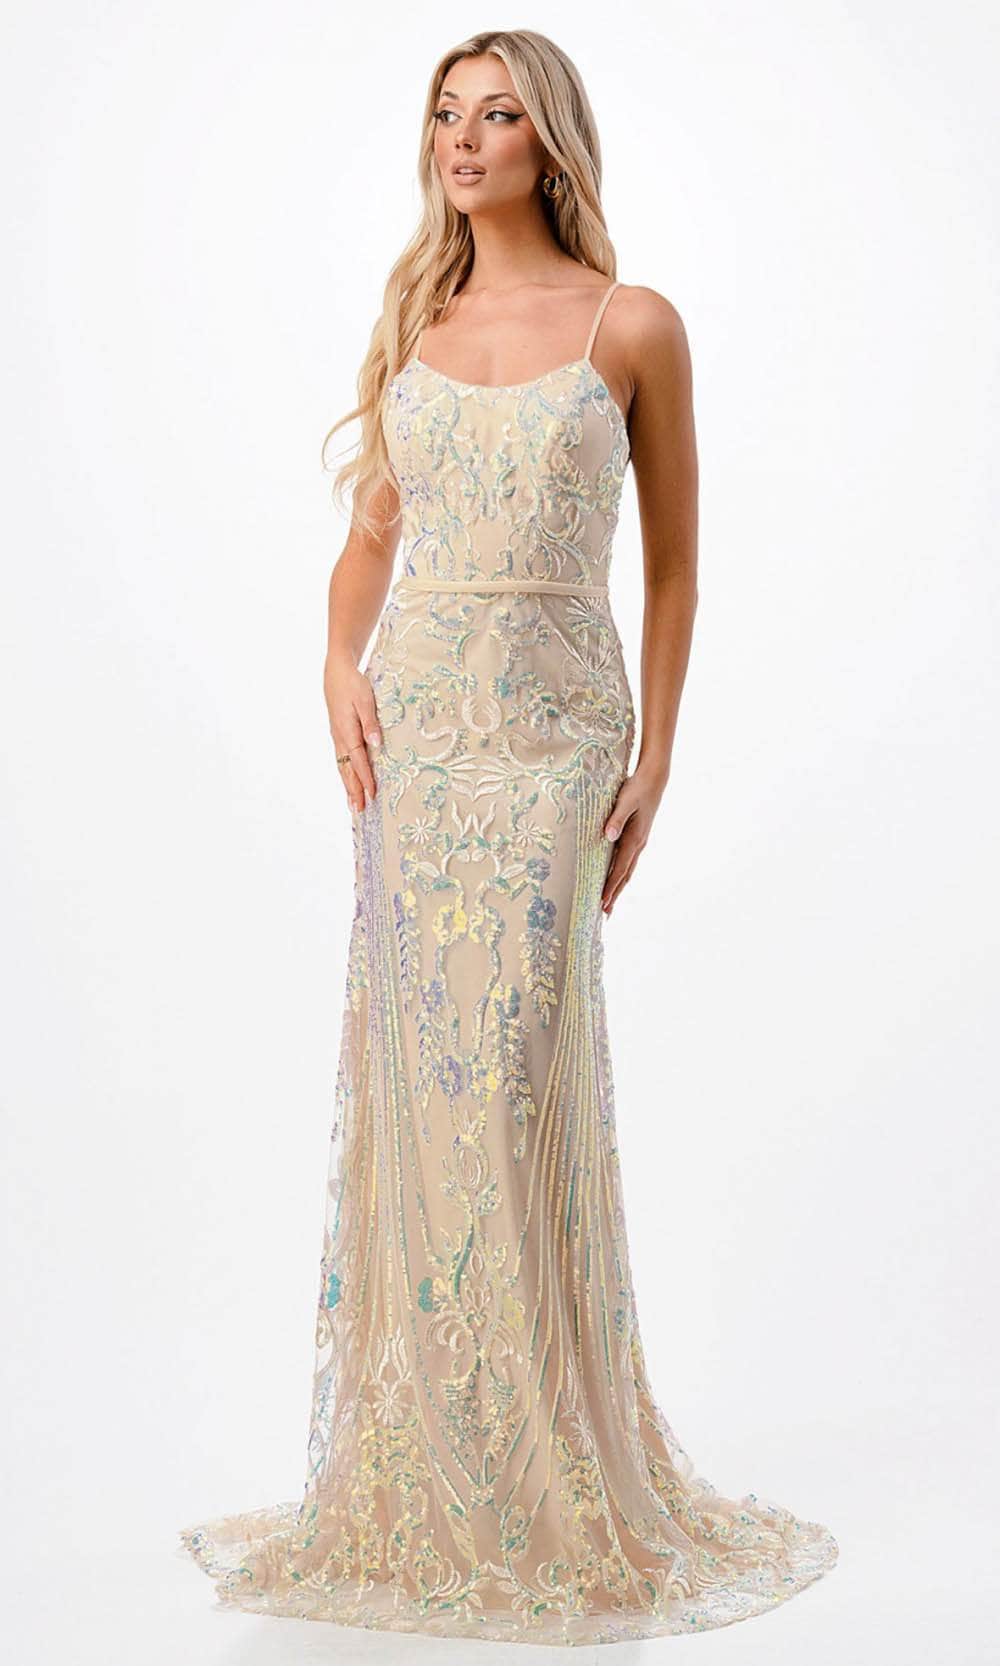 Image of Aspeed Design P2116 - Sleeveless Fitted Mermaid Prom Gown